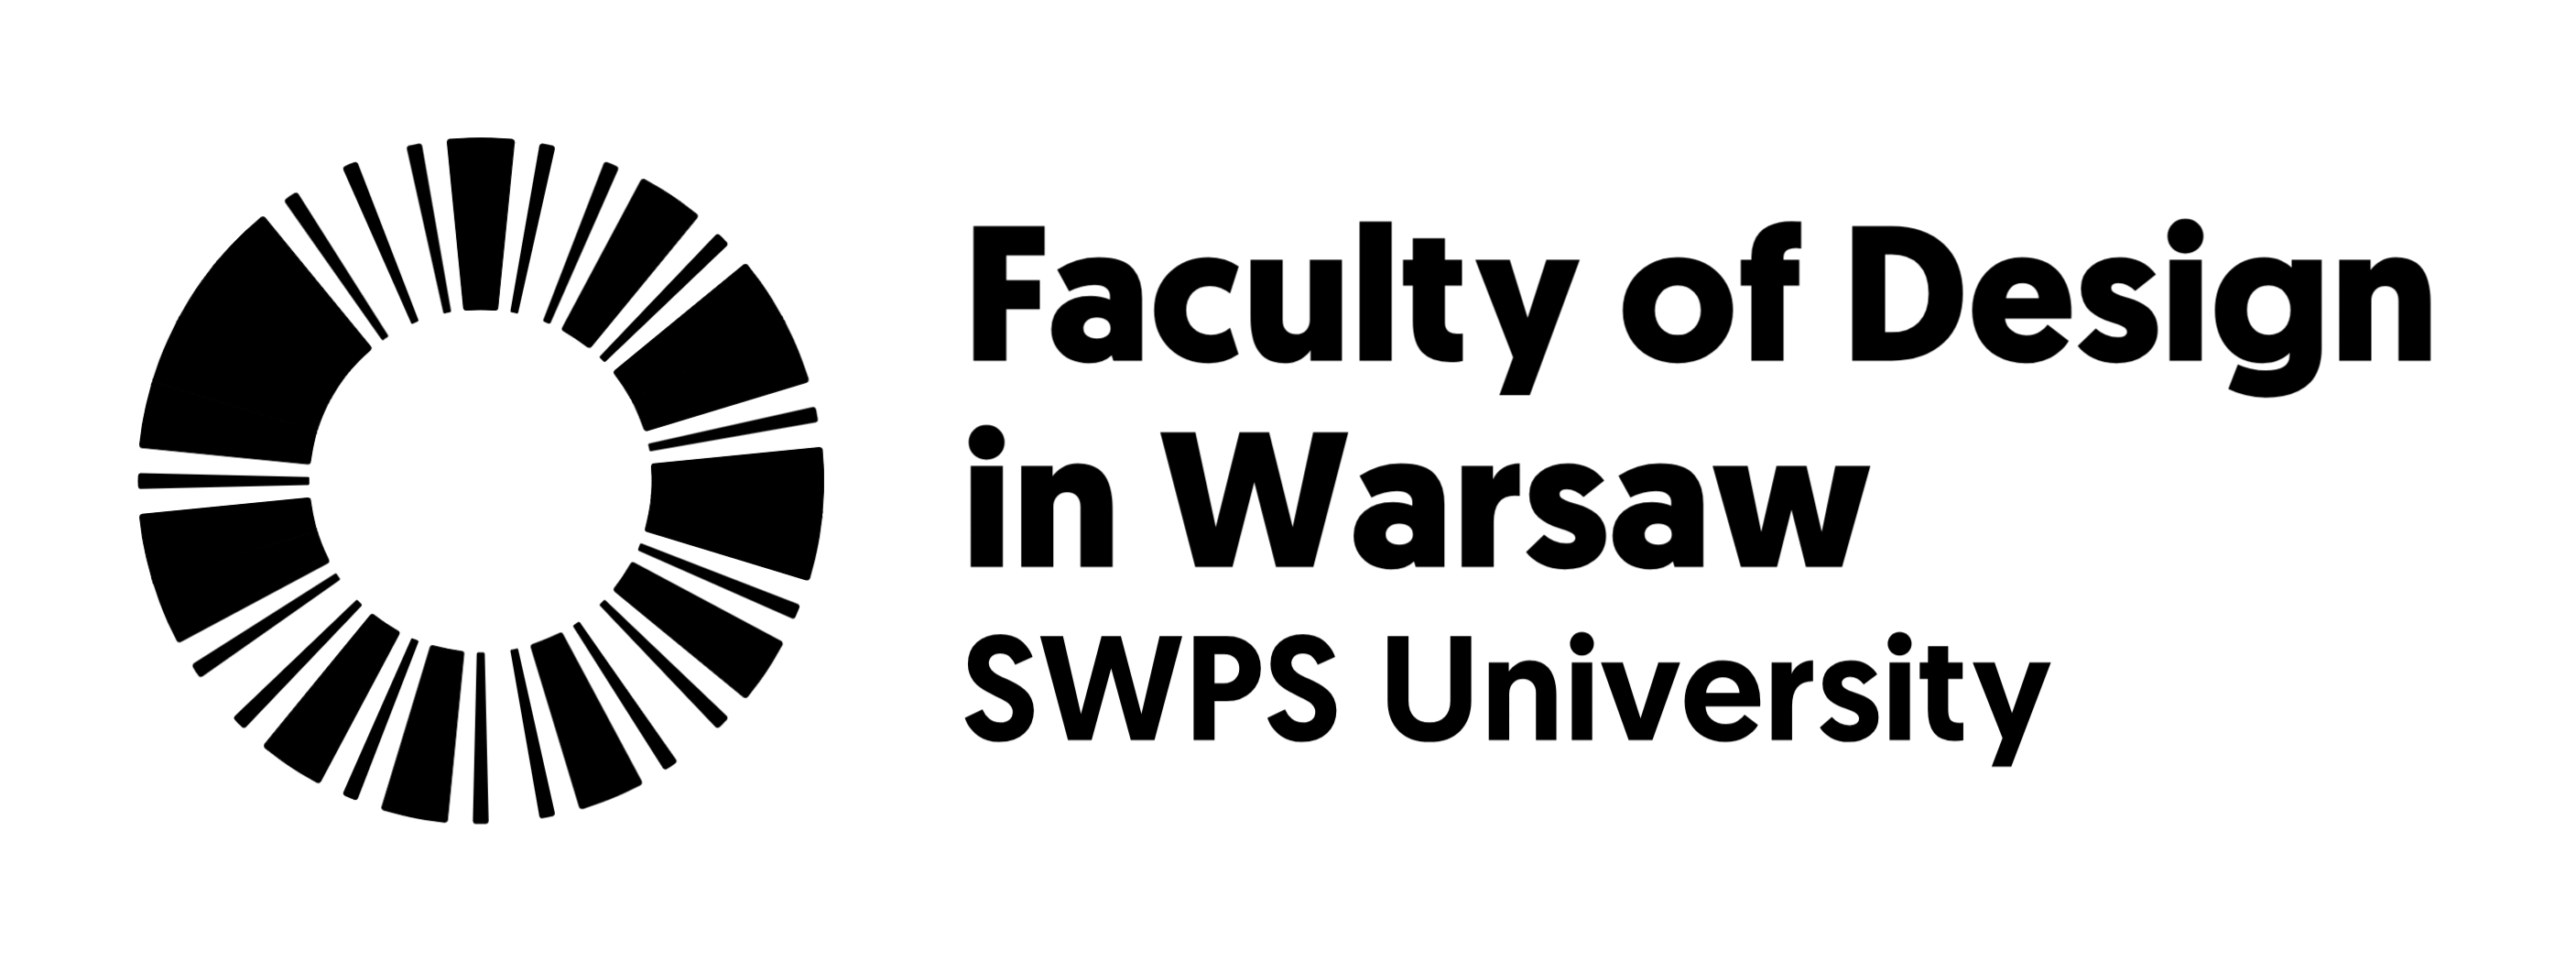 Faculty of Design in Warsaw